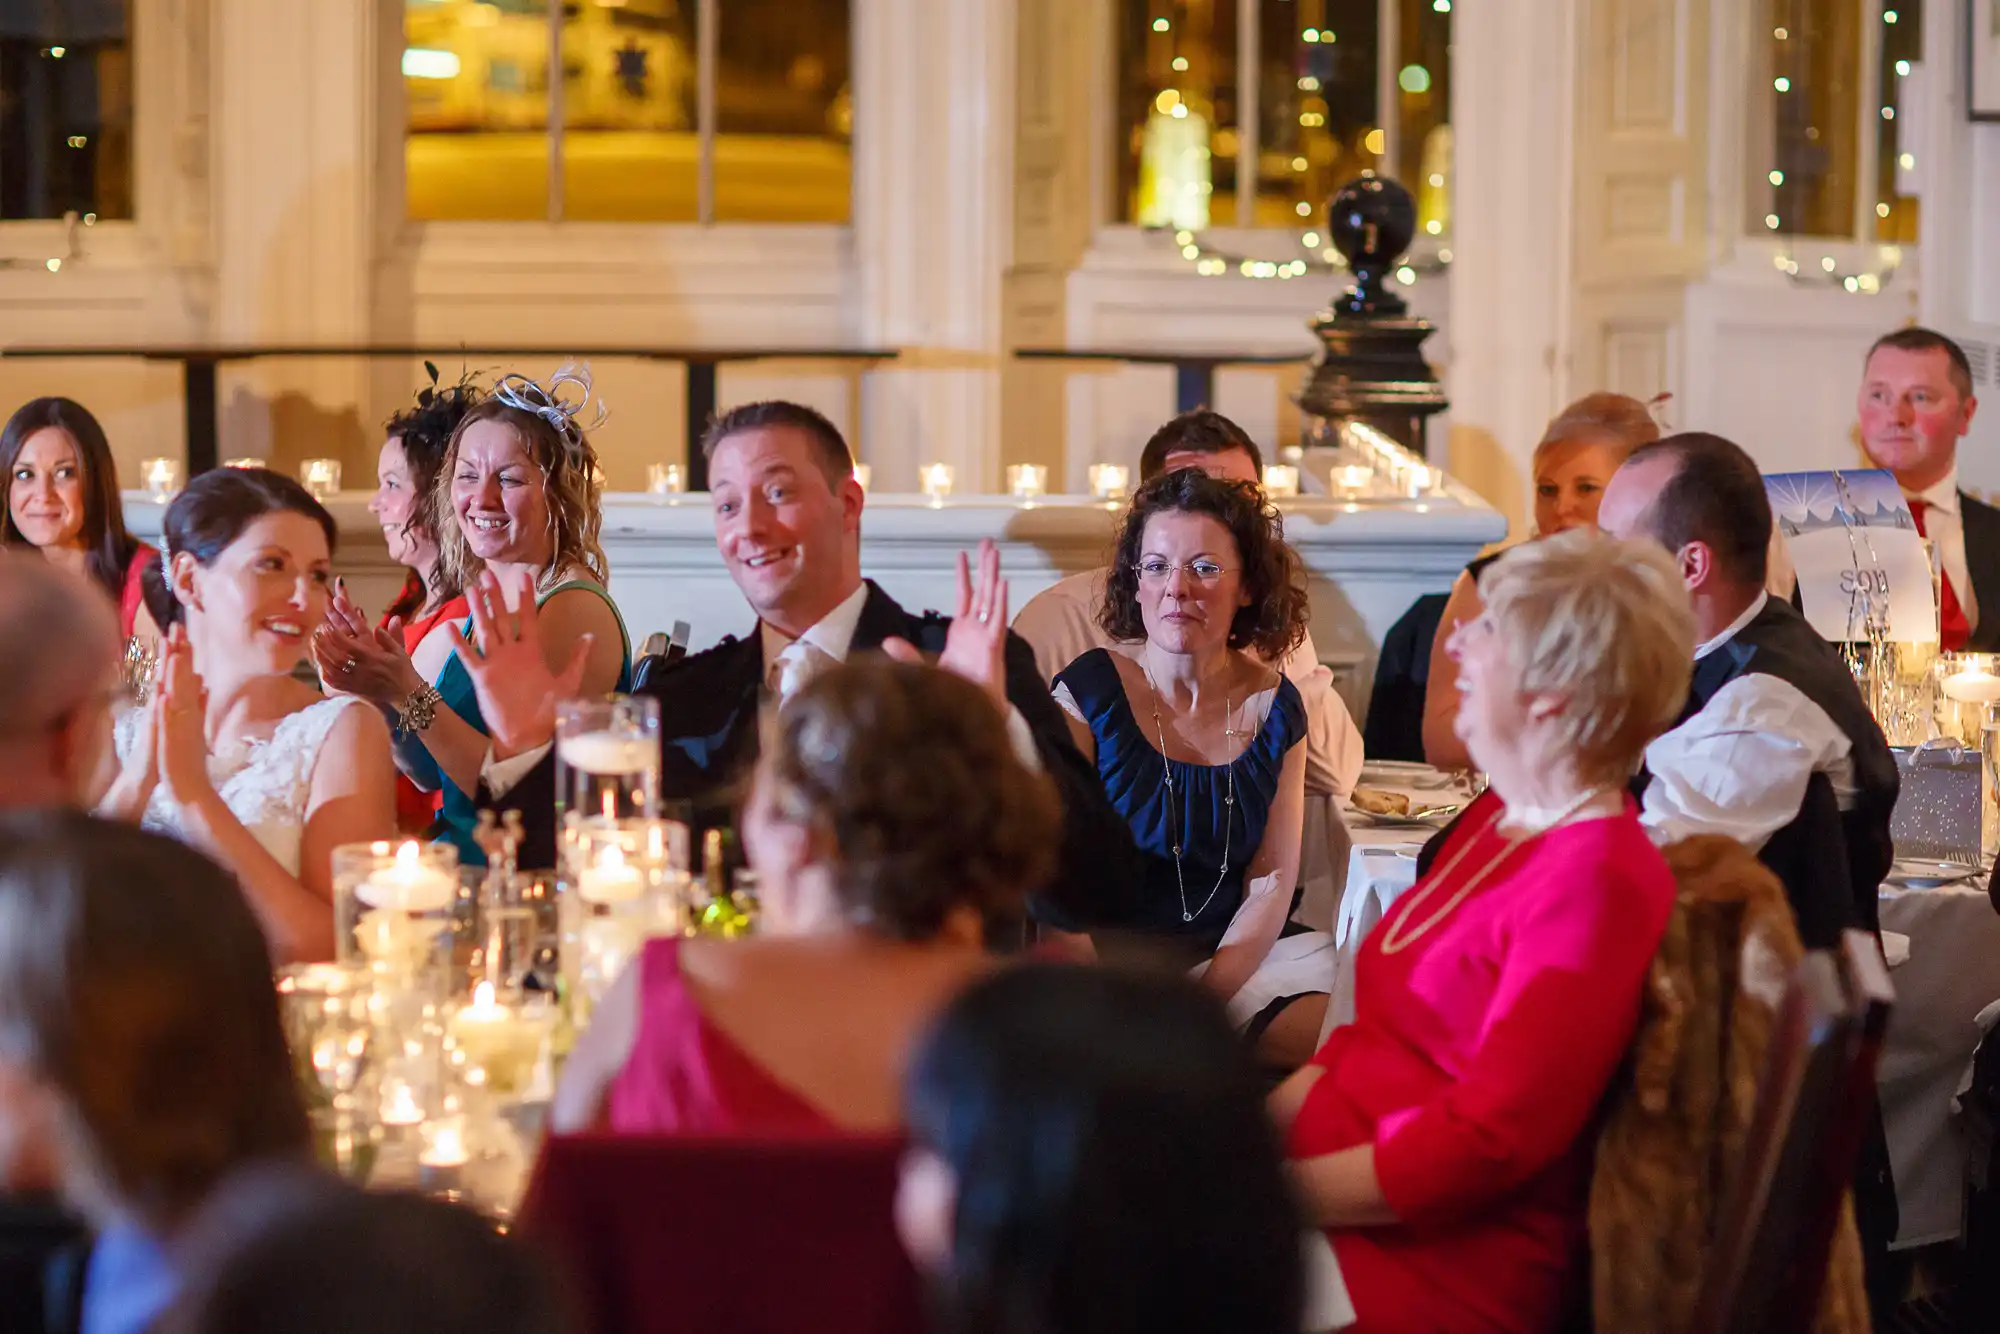 Wedding guests seated at ornately decorated tables, listening and reacting to speeches in a warmly lit banquet hall.